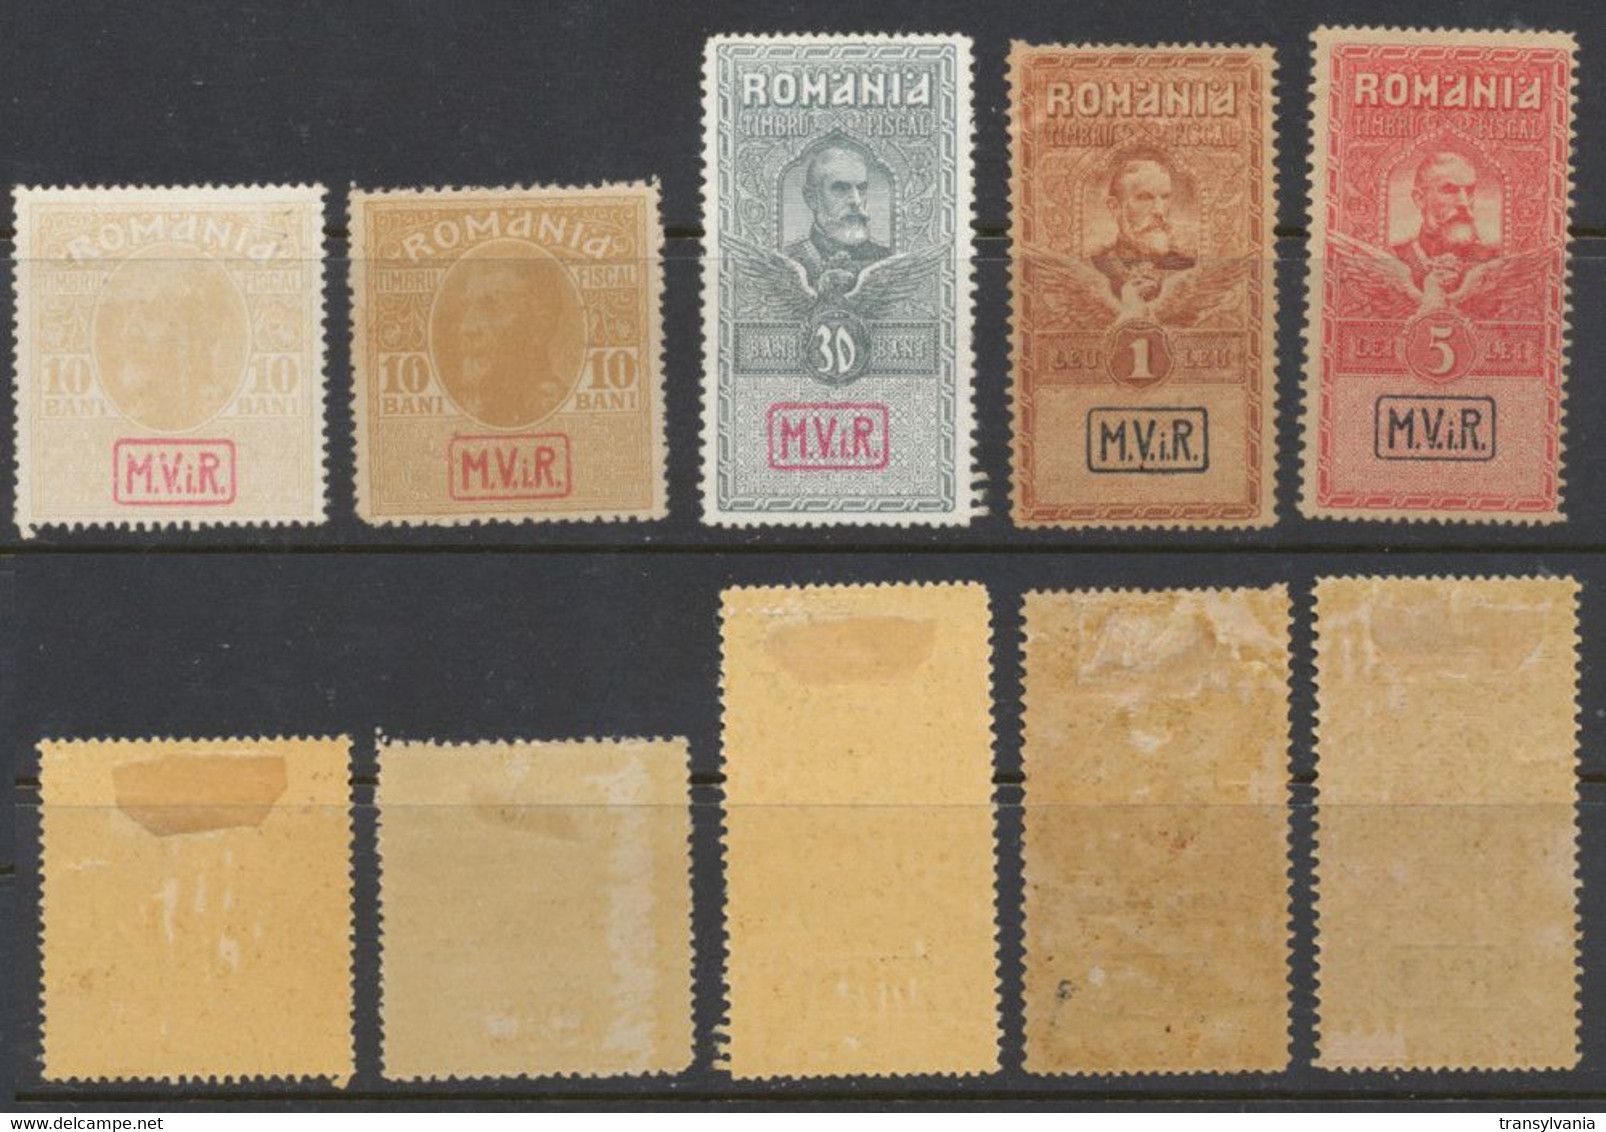 Romania WW1 Germany Occupation Set Of 4 Postage & Revenue Stamps MViR Overprint Plus Stamp On War Paper Variety - Occupations